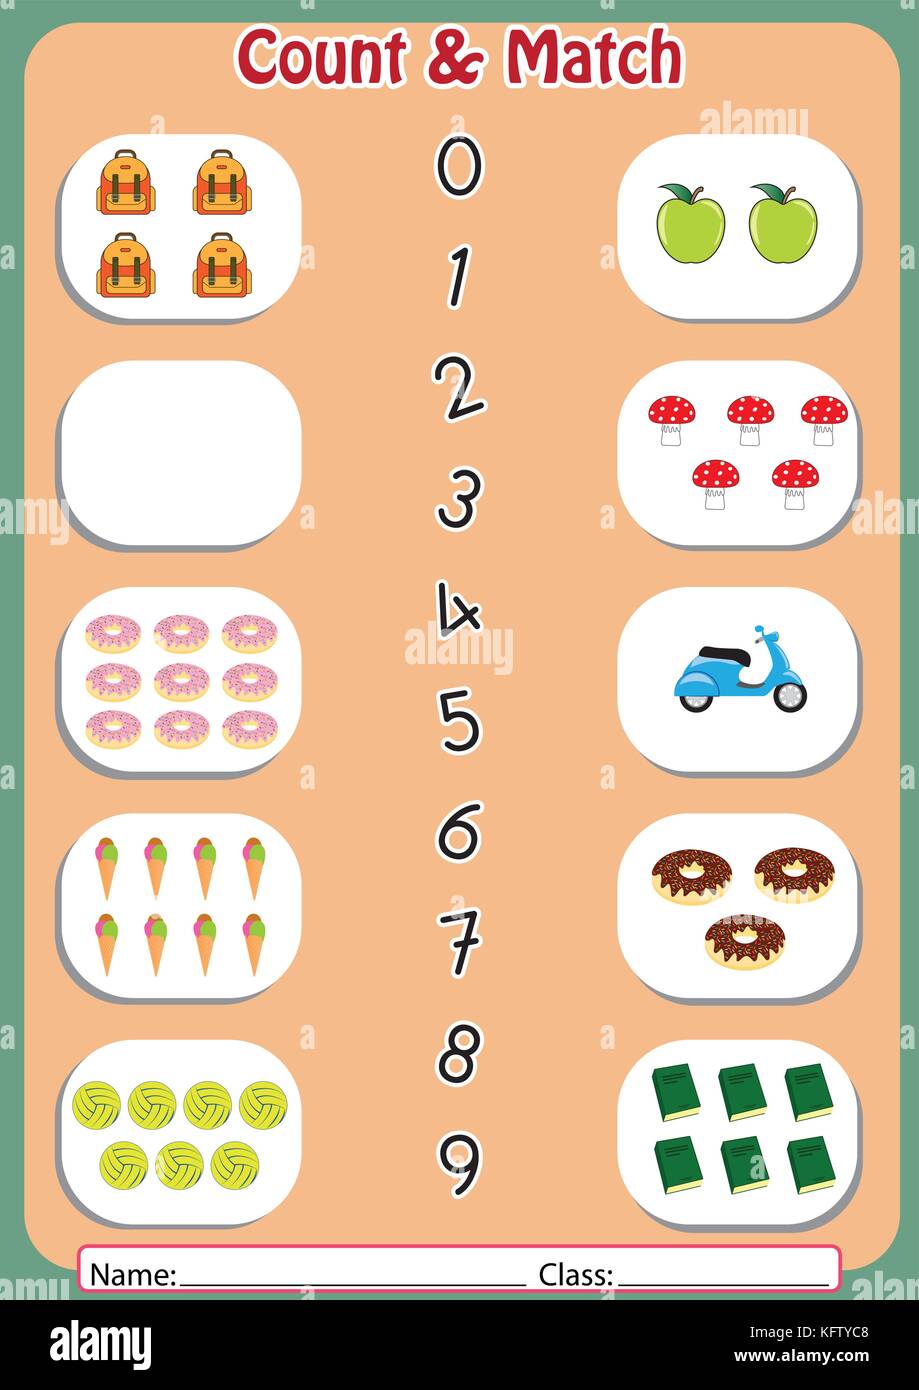 match-the-numbers-to-the-objects-worksheet-for-preschool-stock-vector-image-art-alamy